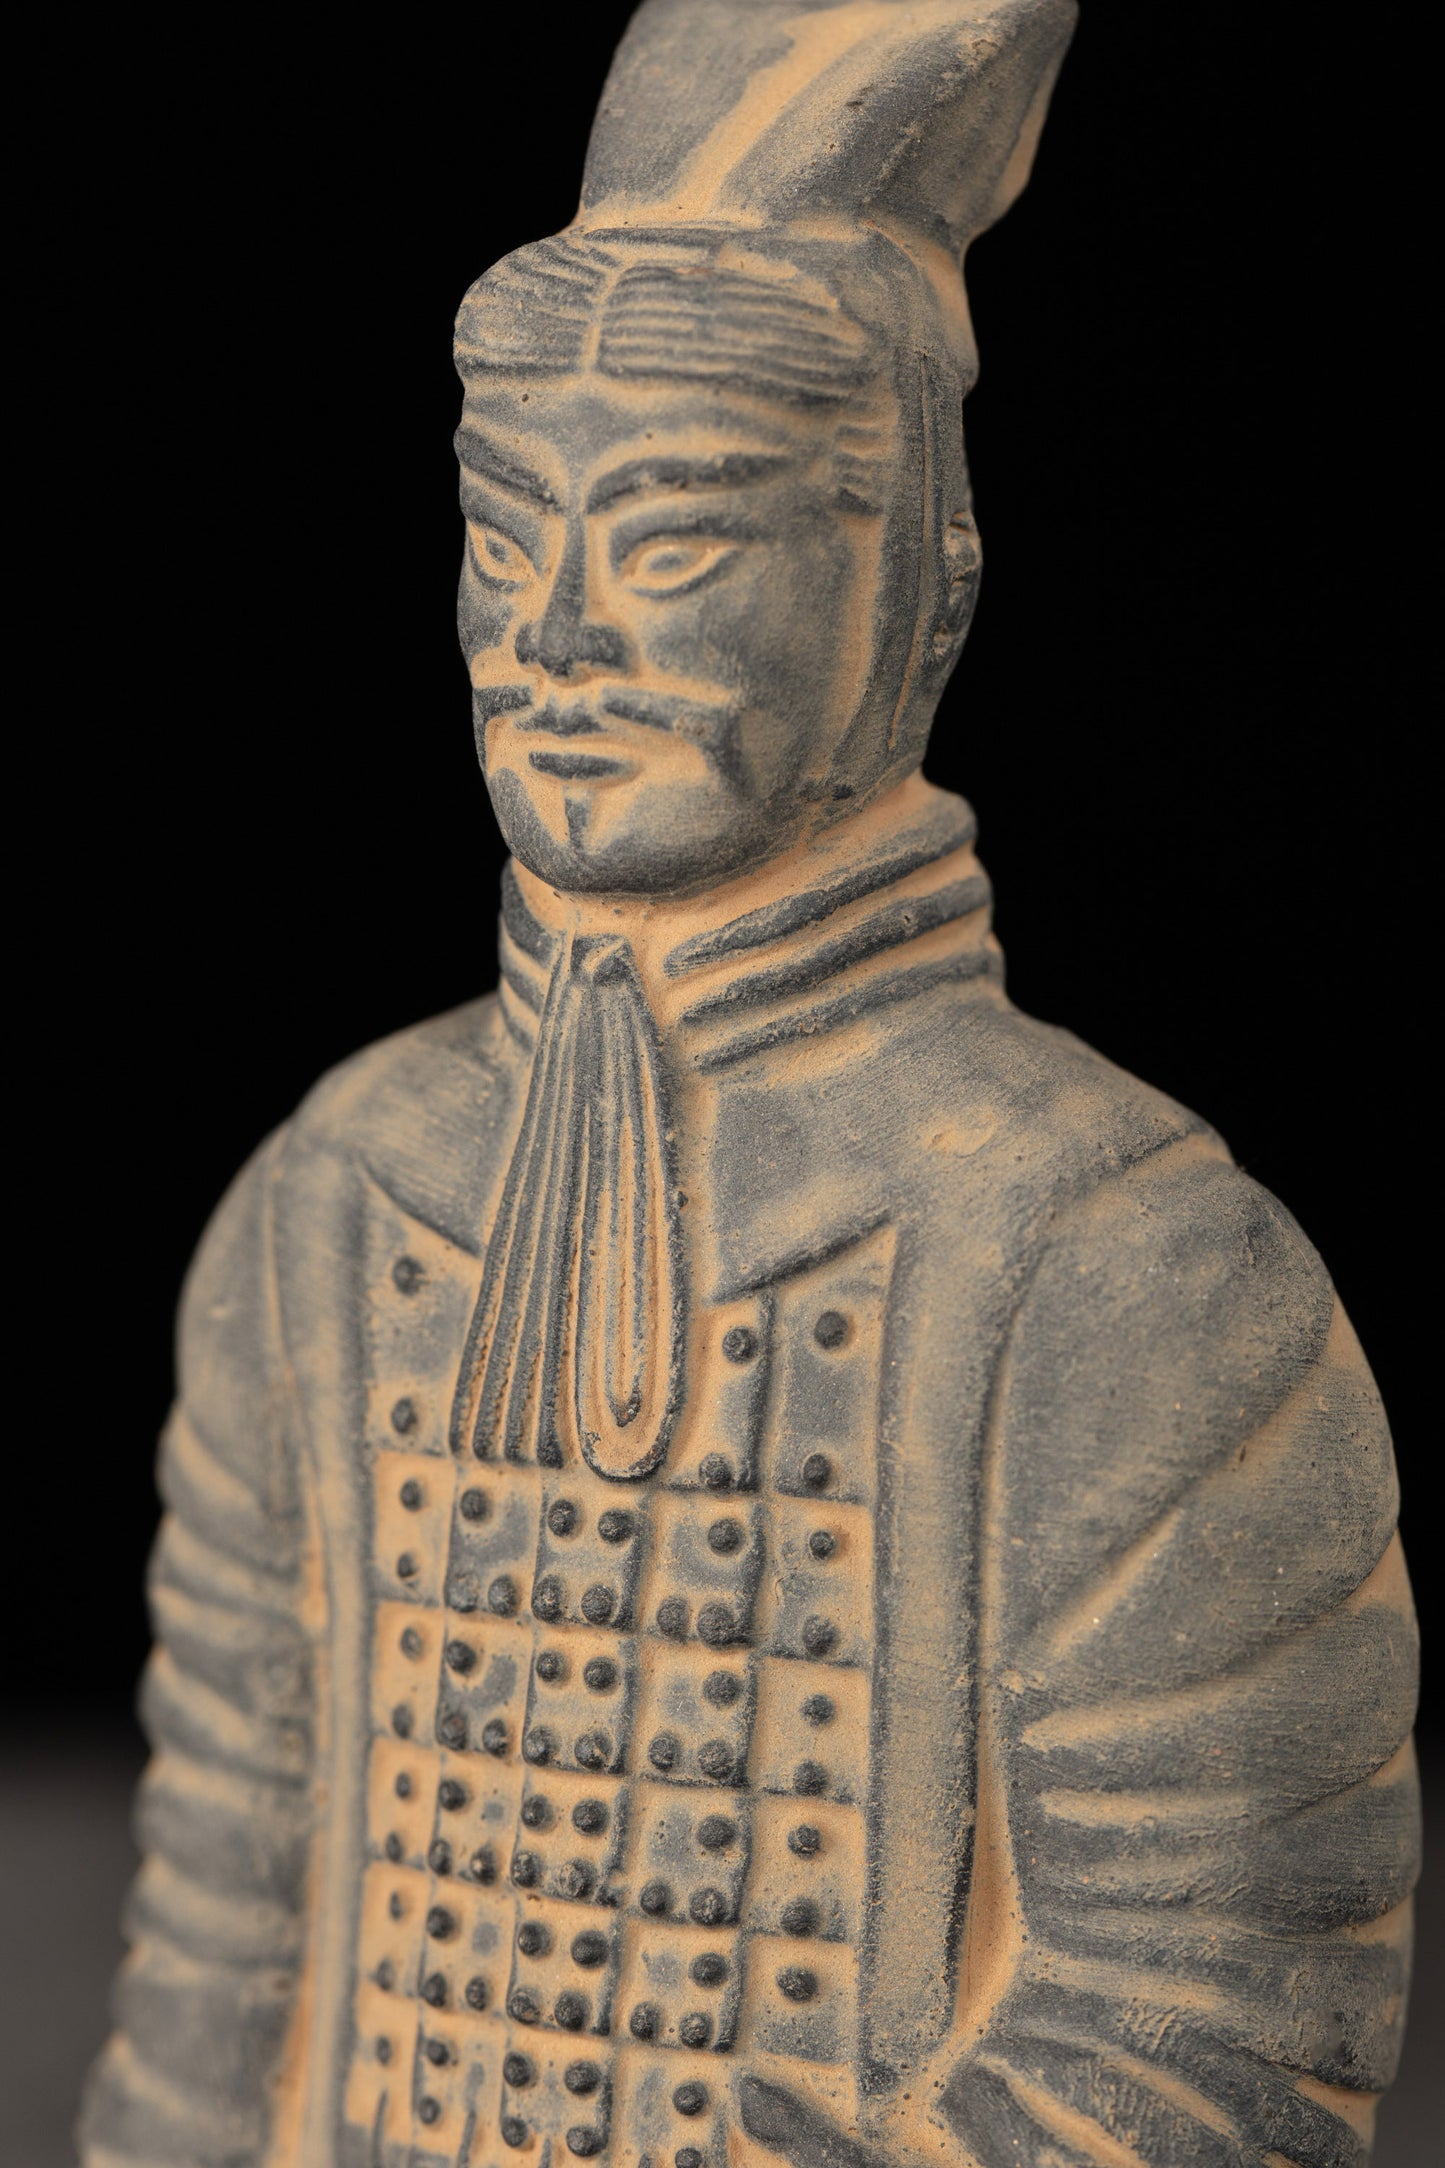 15CM Officier - CLAYARMY-Highlighting the right overlapping collar and armor details on the 15CM Officer in this image.